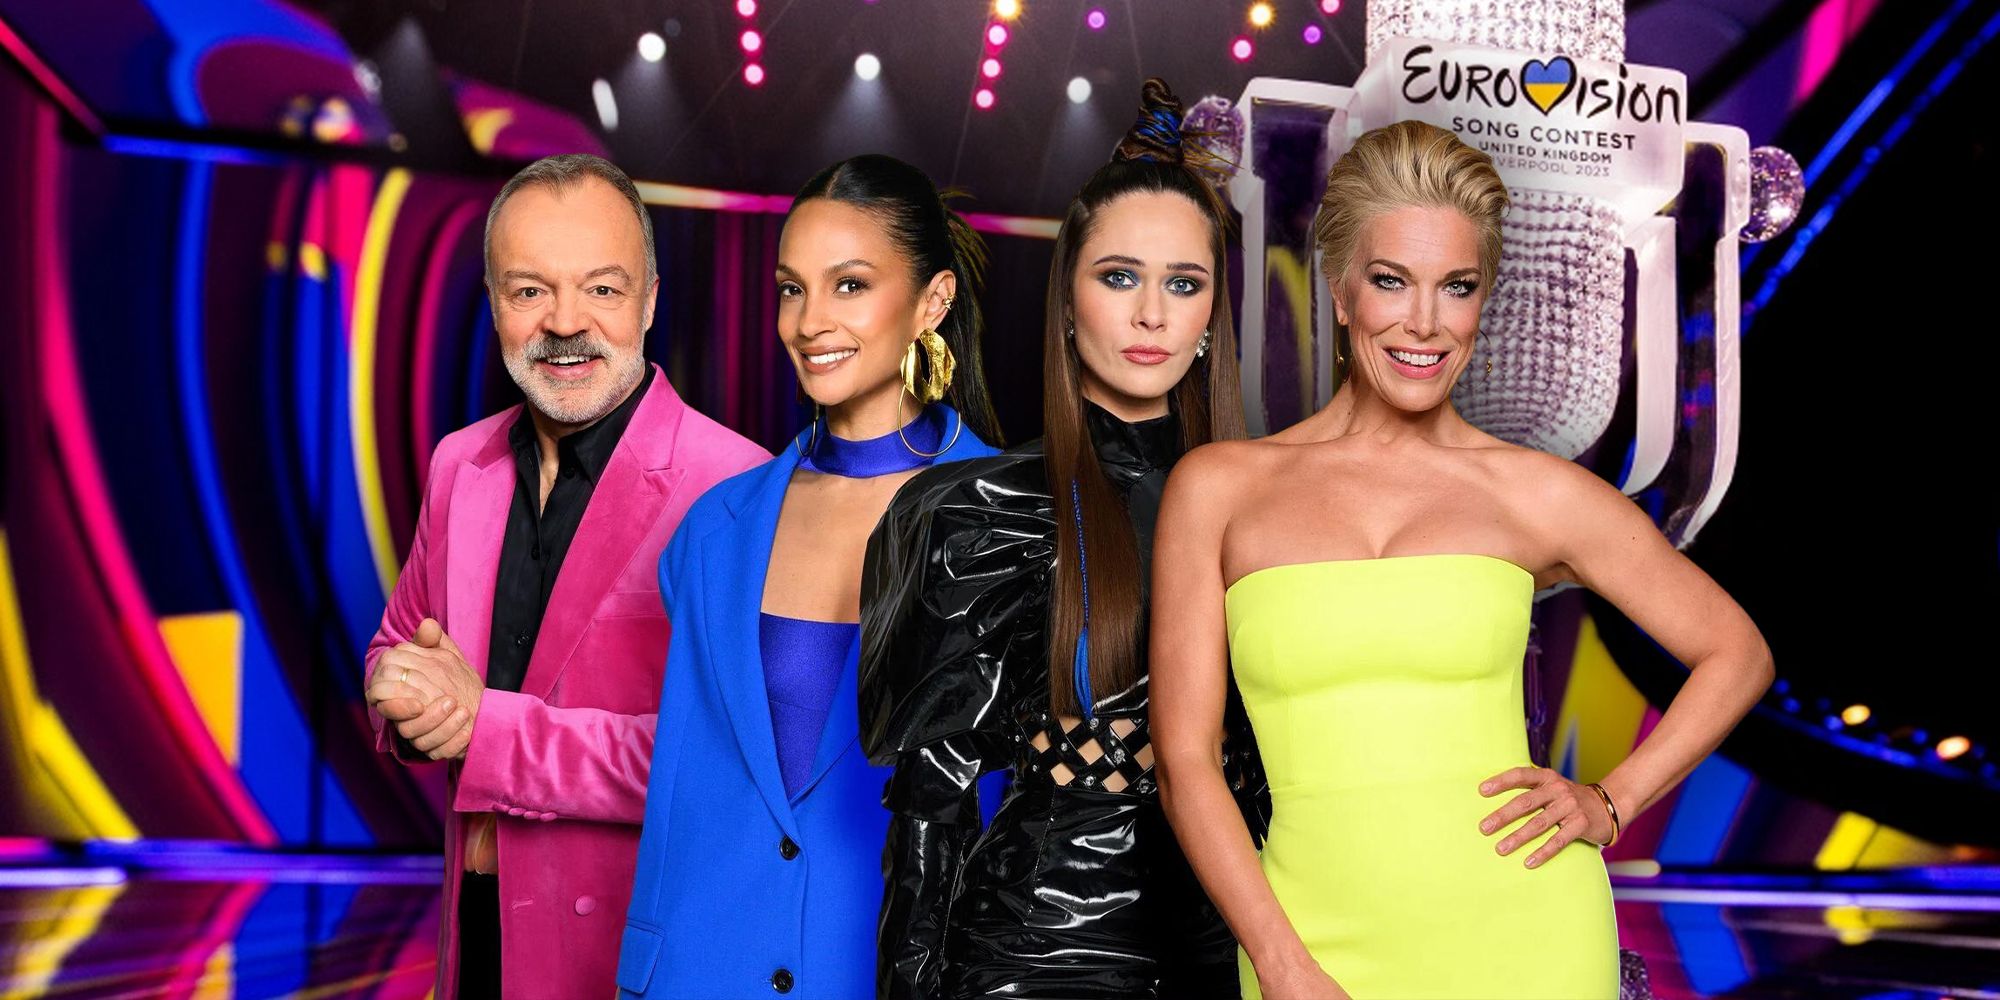 Eurovision Song Contest Power Ranking: Who Is Most Likely To Win?